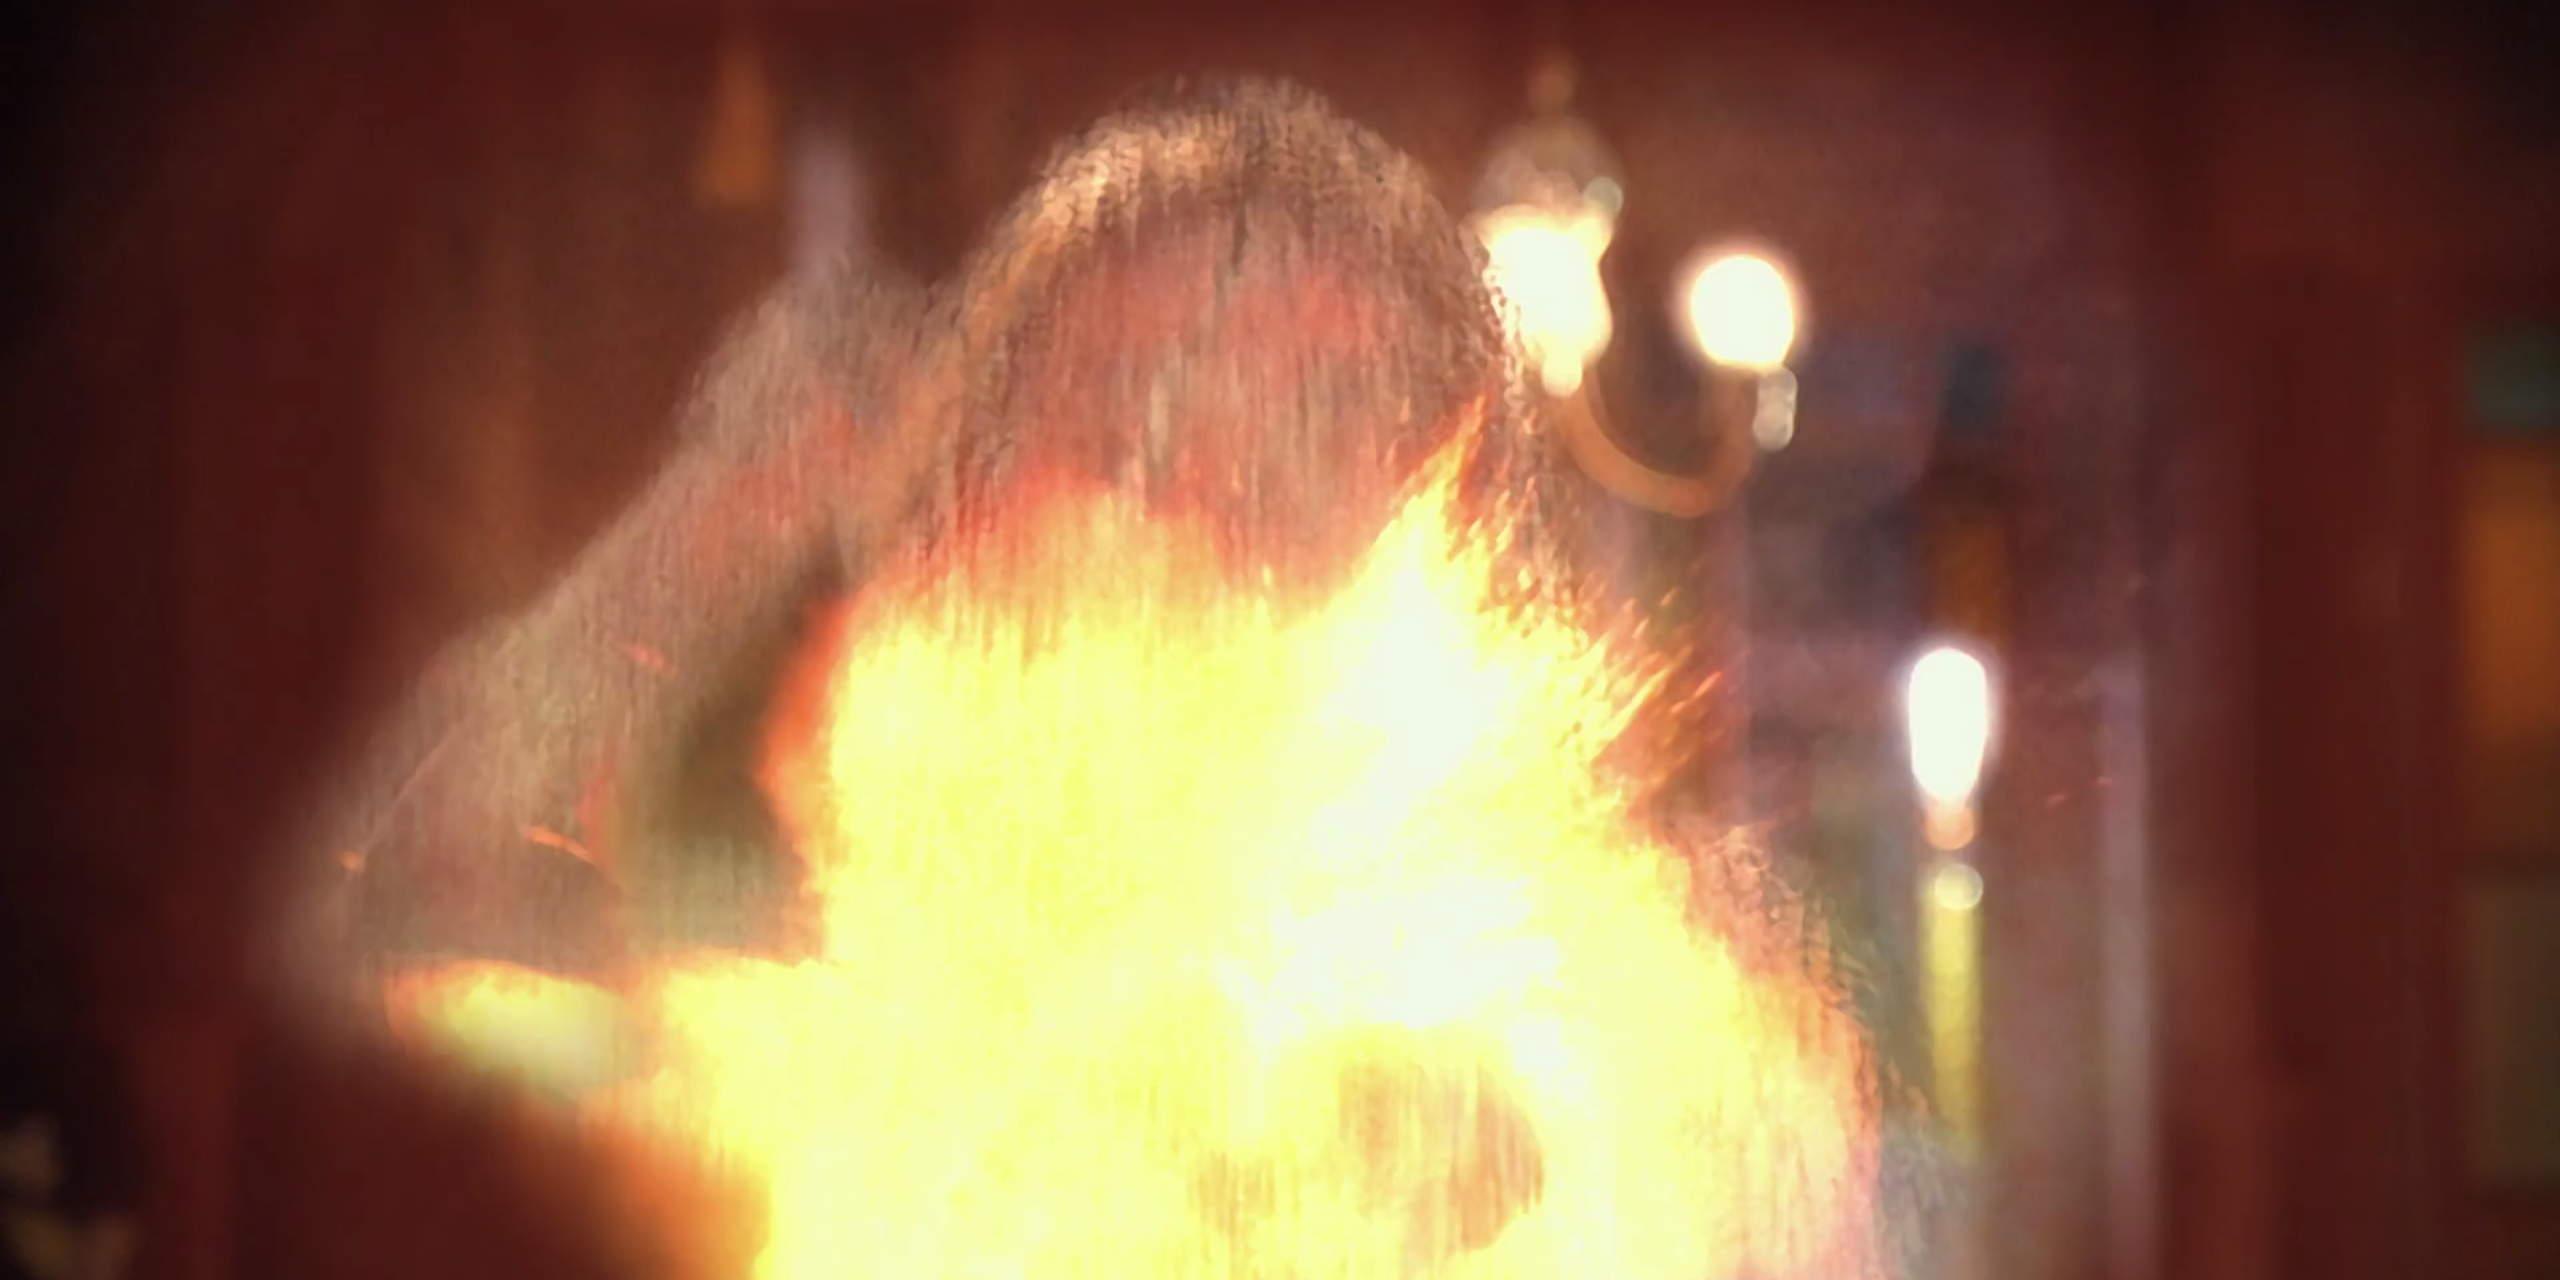 Paige exploding after being hit by a demon on Charmed